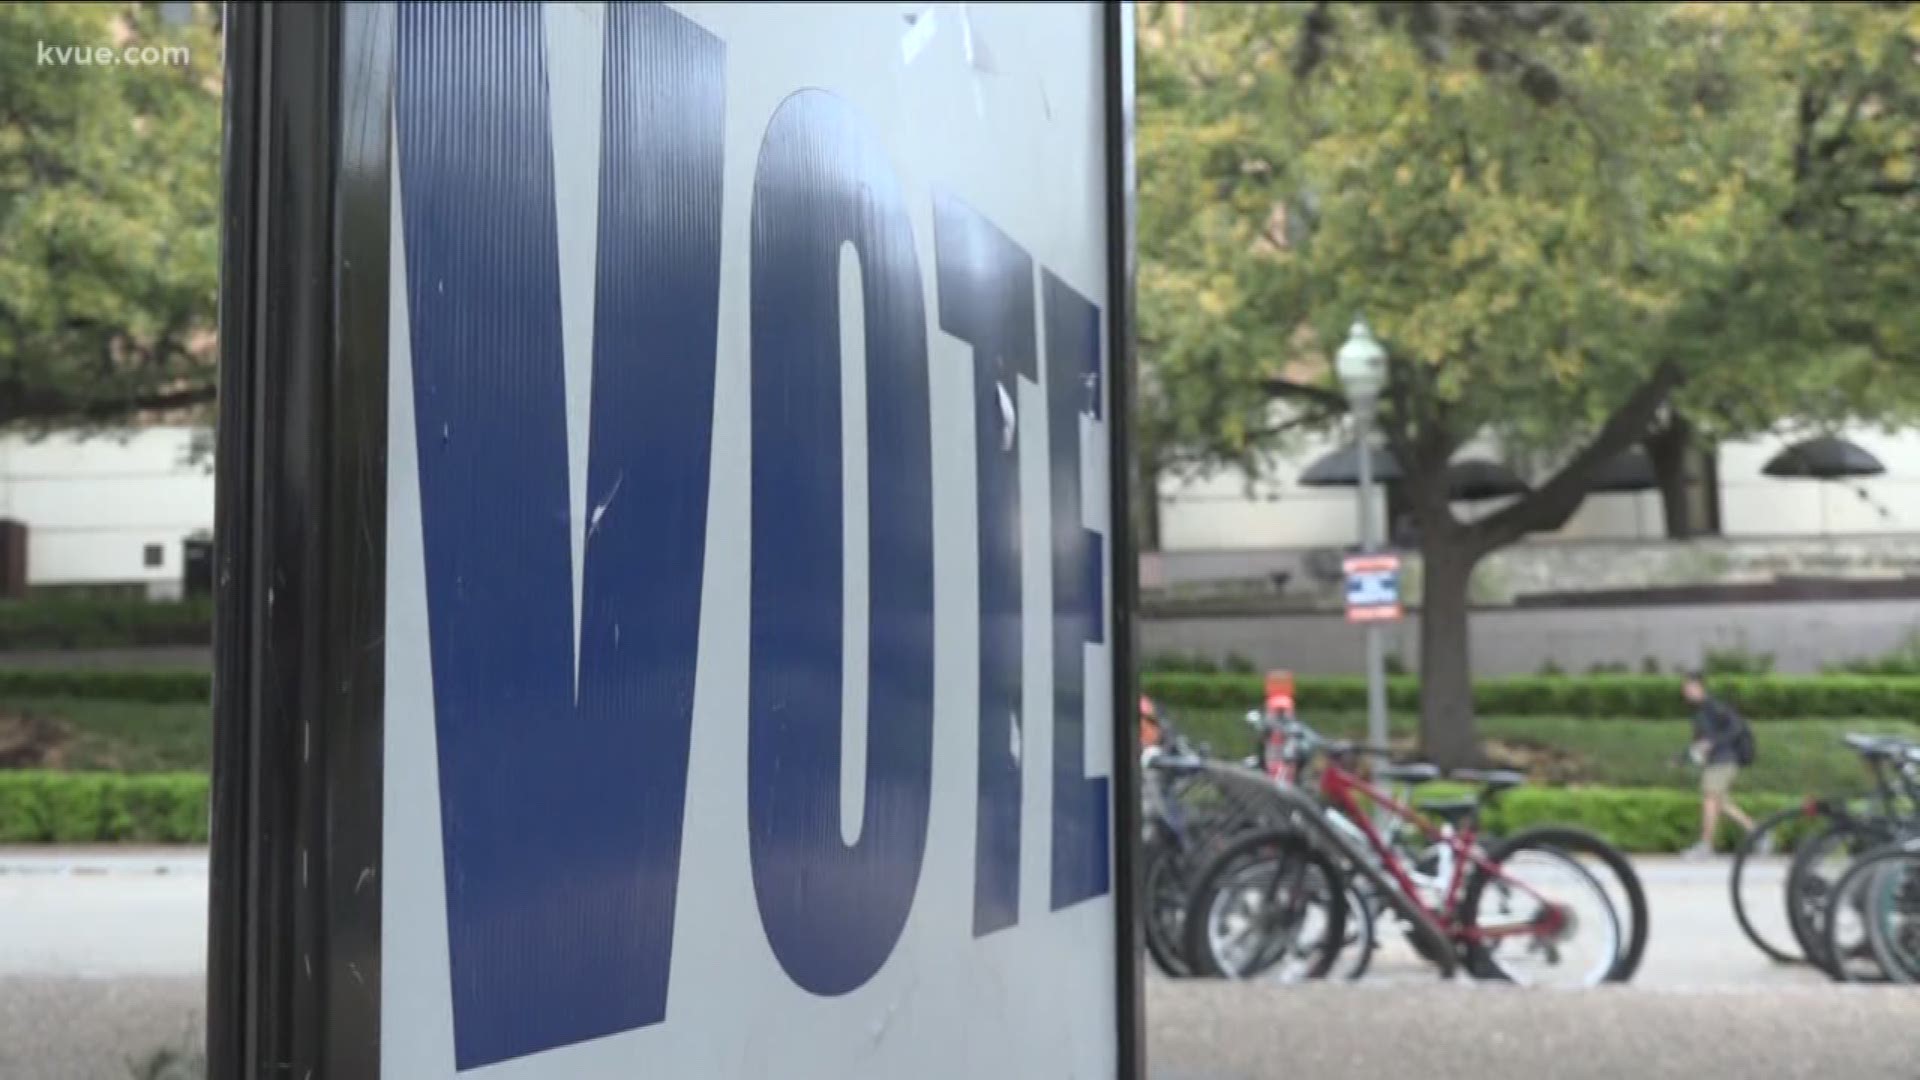 Some young voters and advocacy groups said the issue is unacceptable.